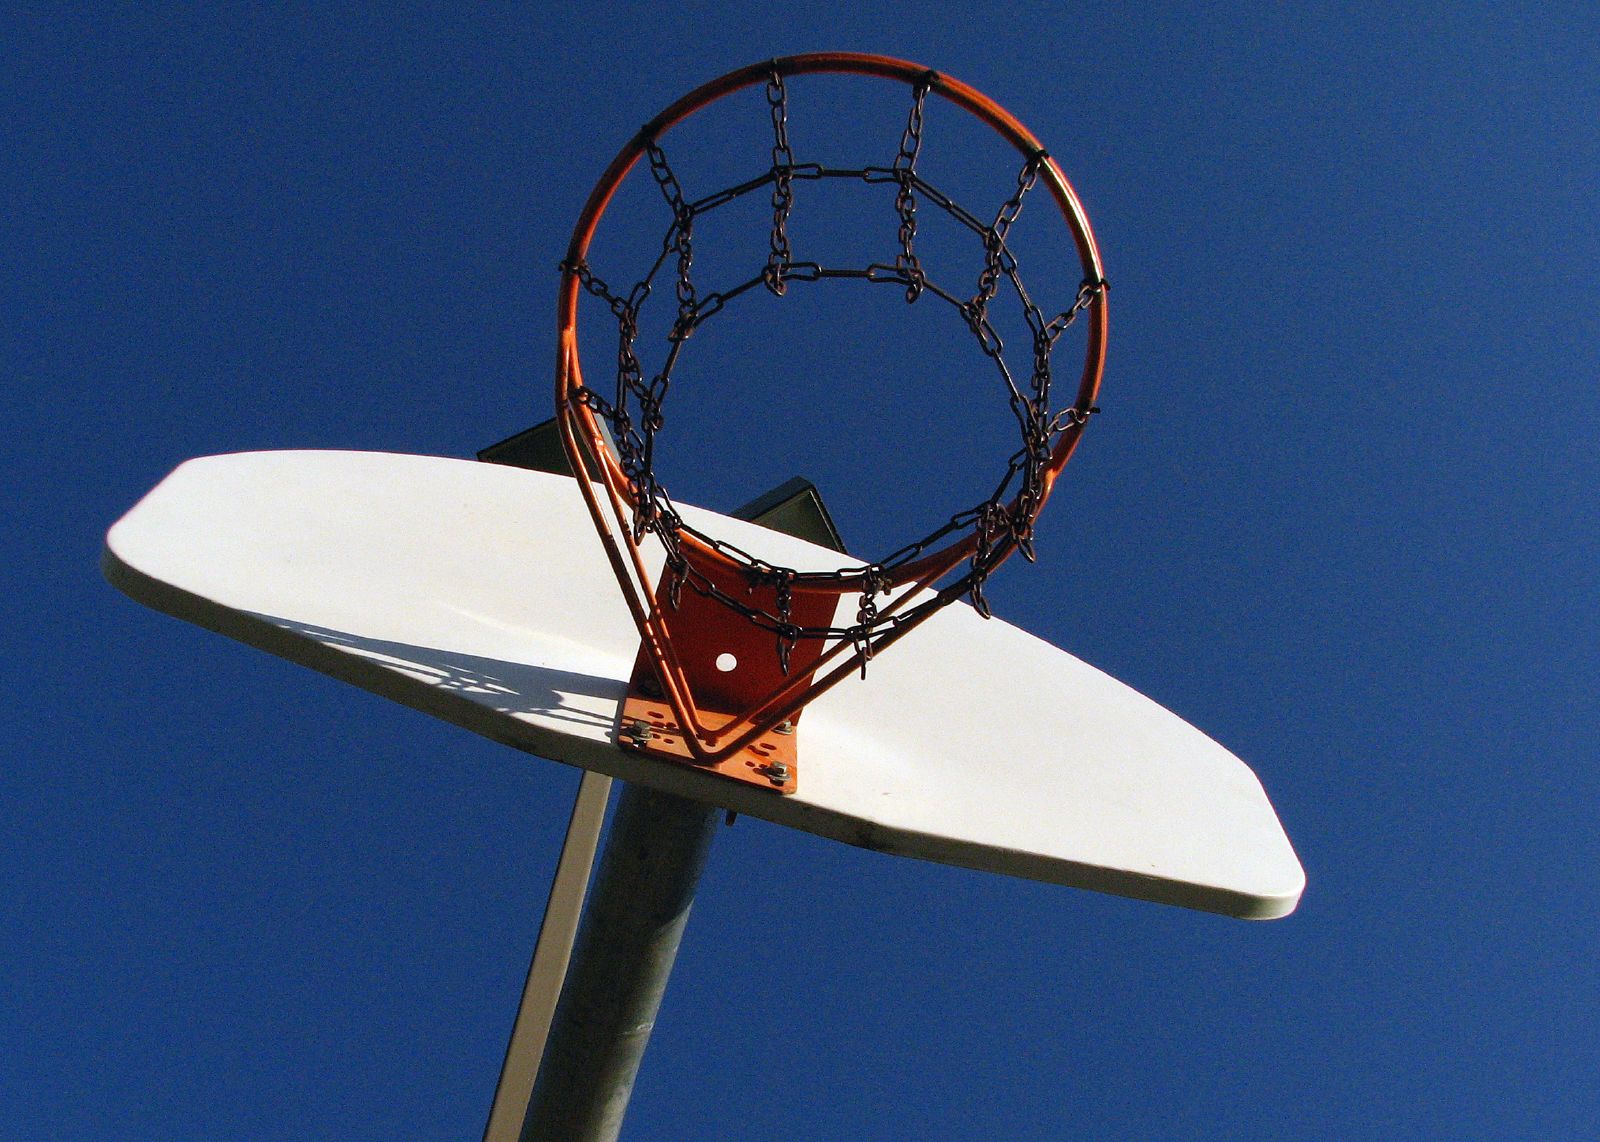 Basketball Hoop. Photo Credit: Dayland Shannon | Under Creative Commons License